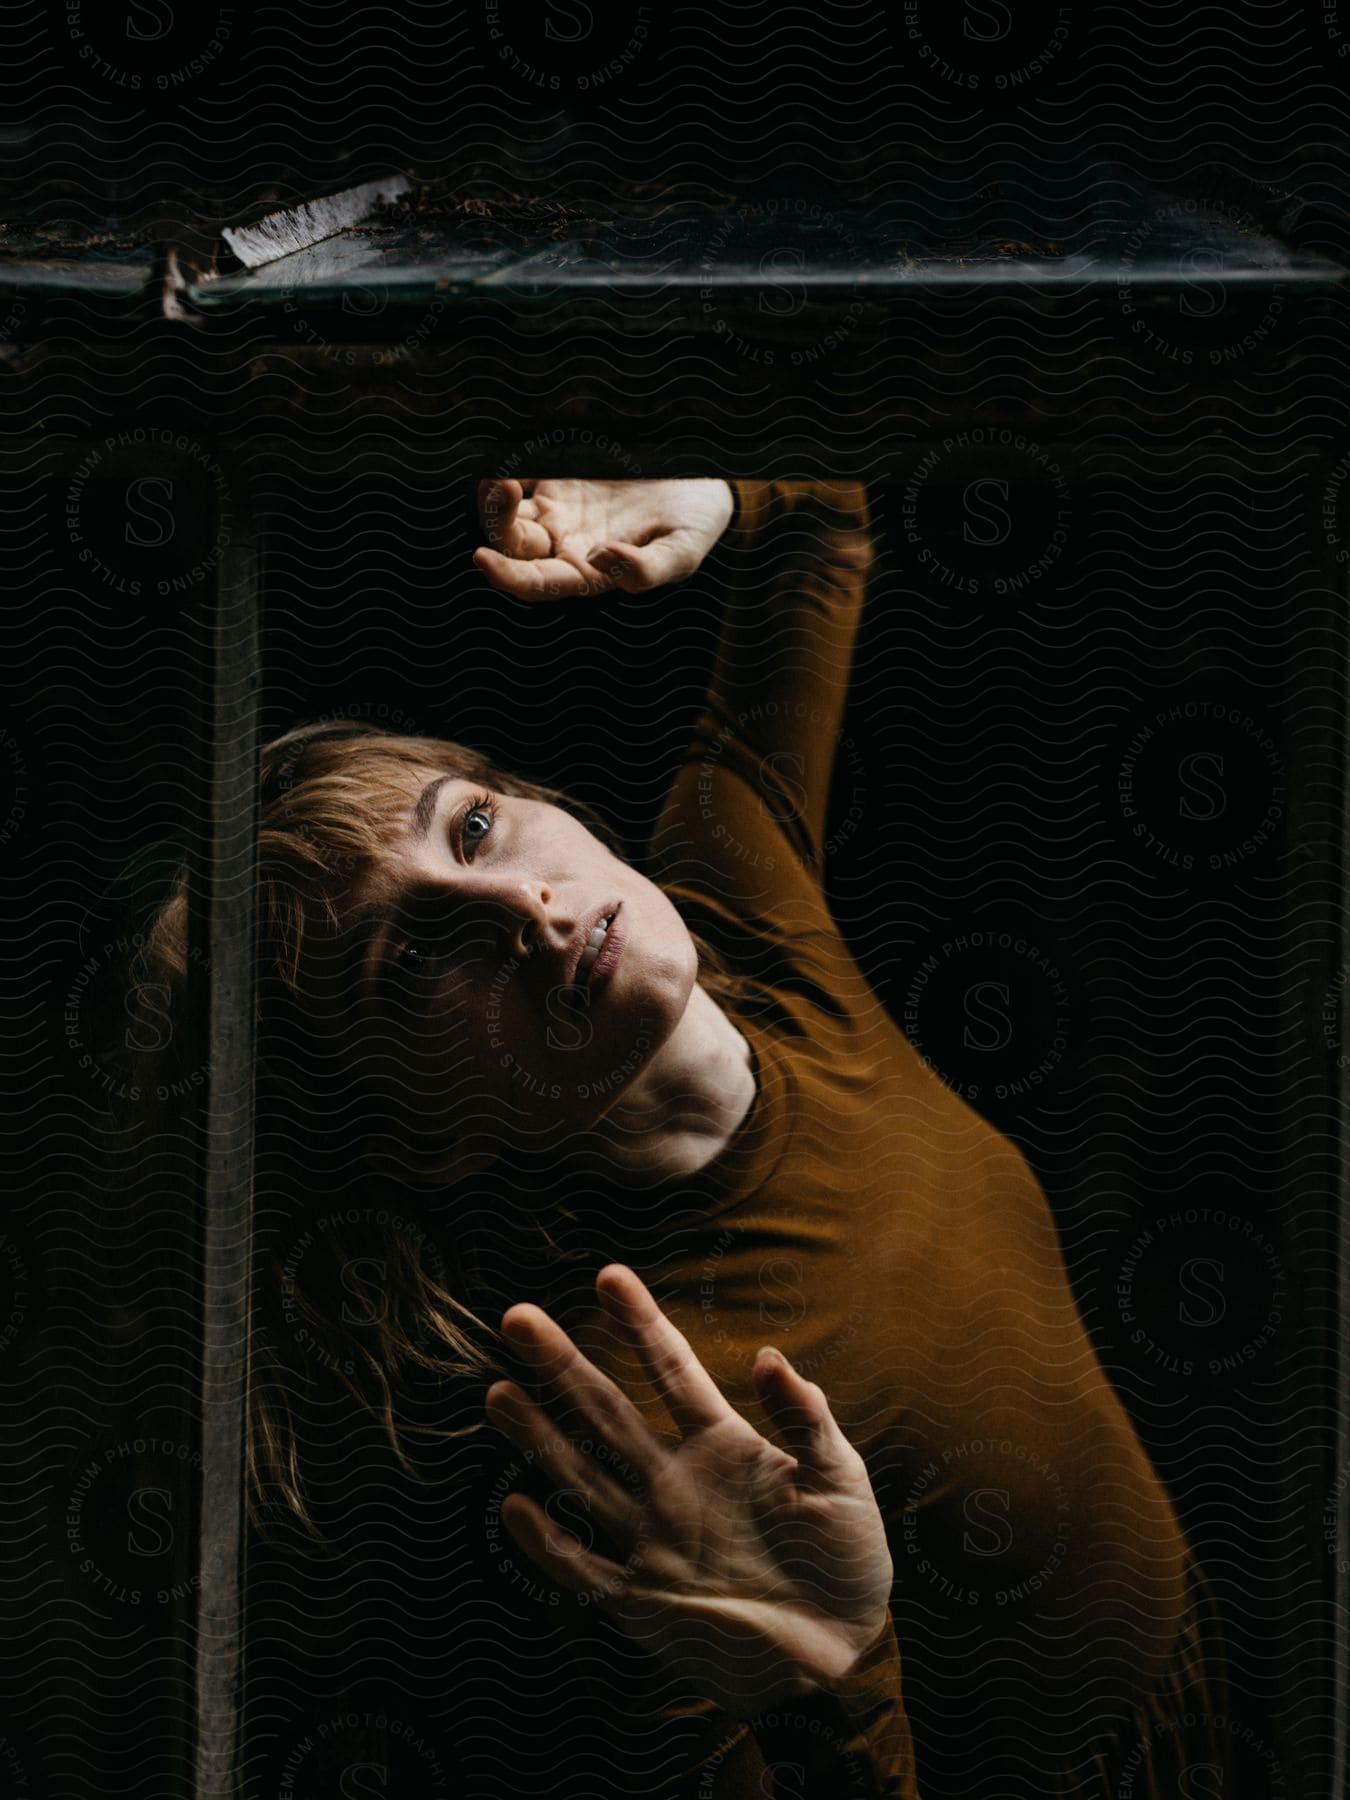 Portrait of a woman in a dark, mirrored room with an unusual facial expression.